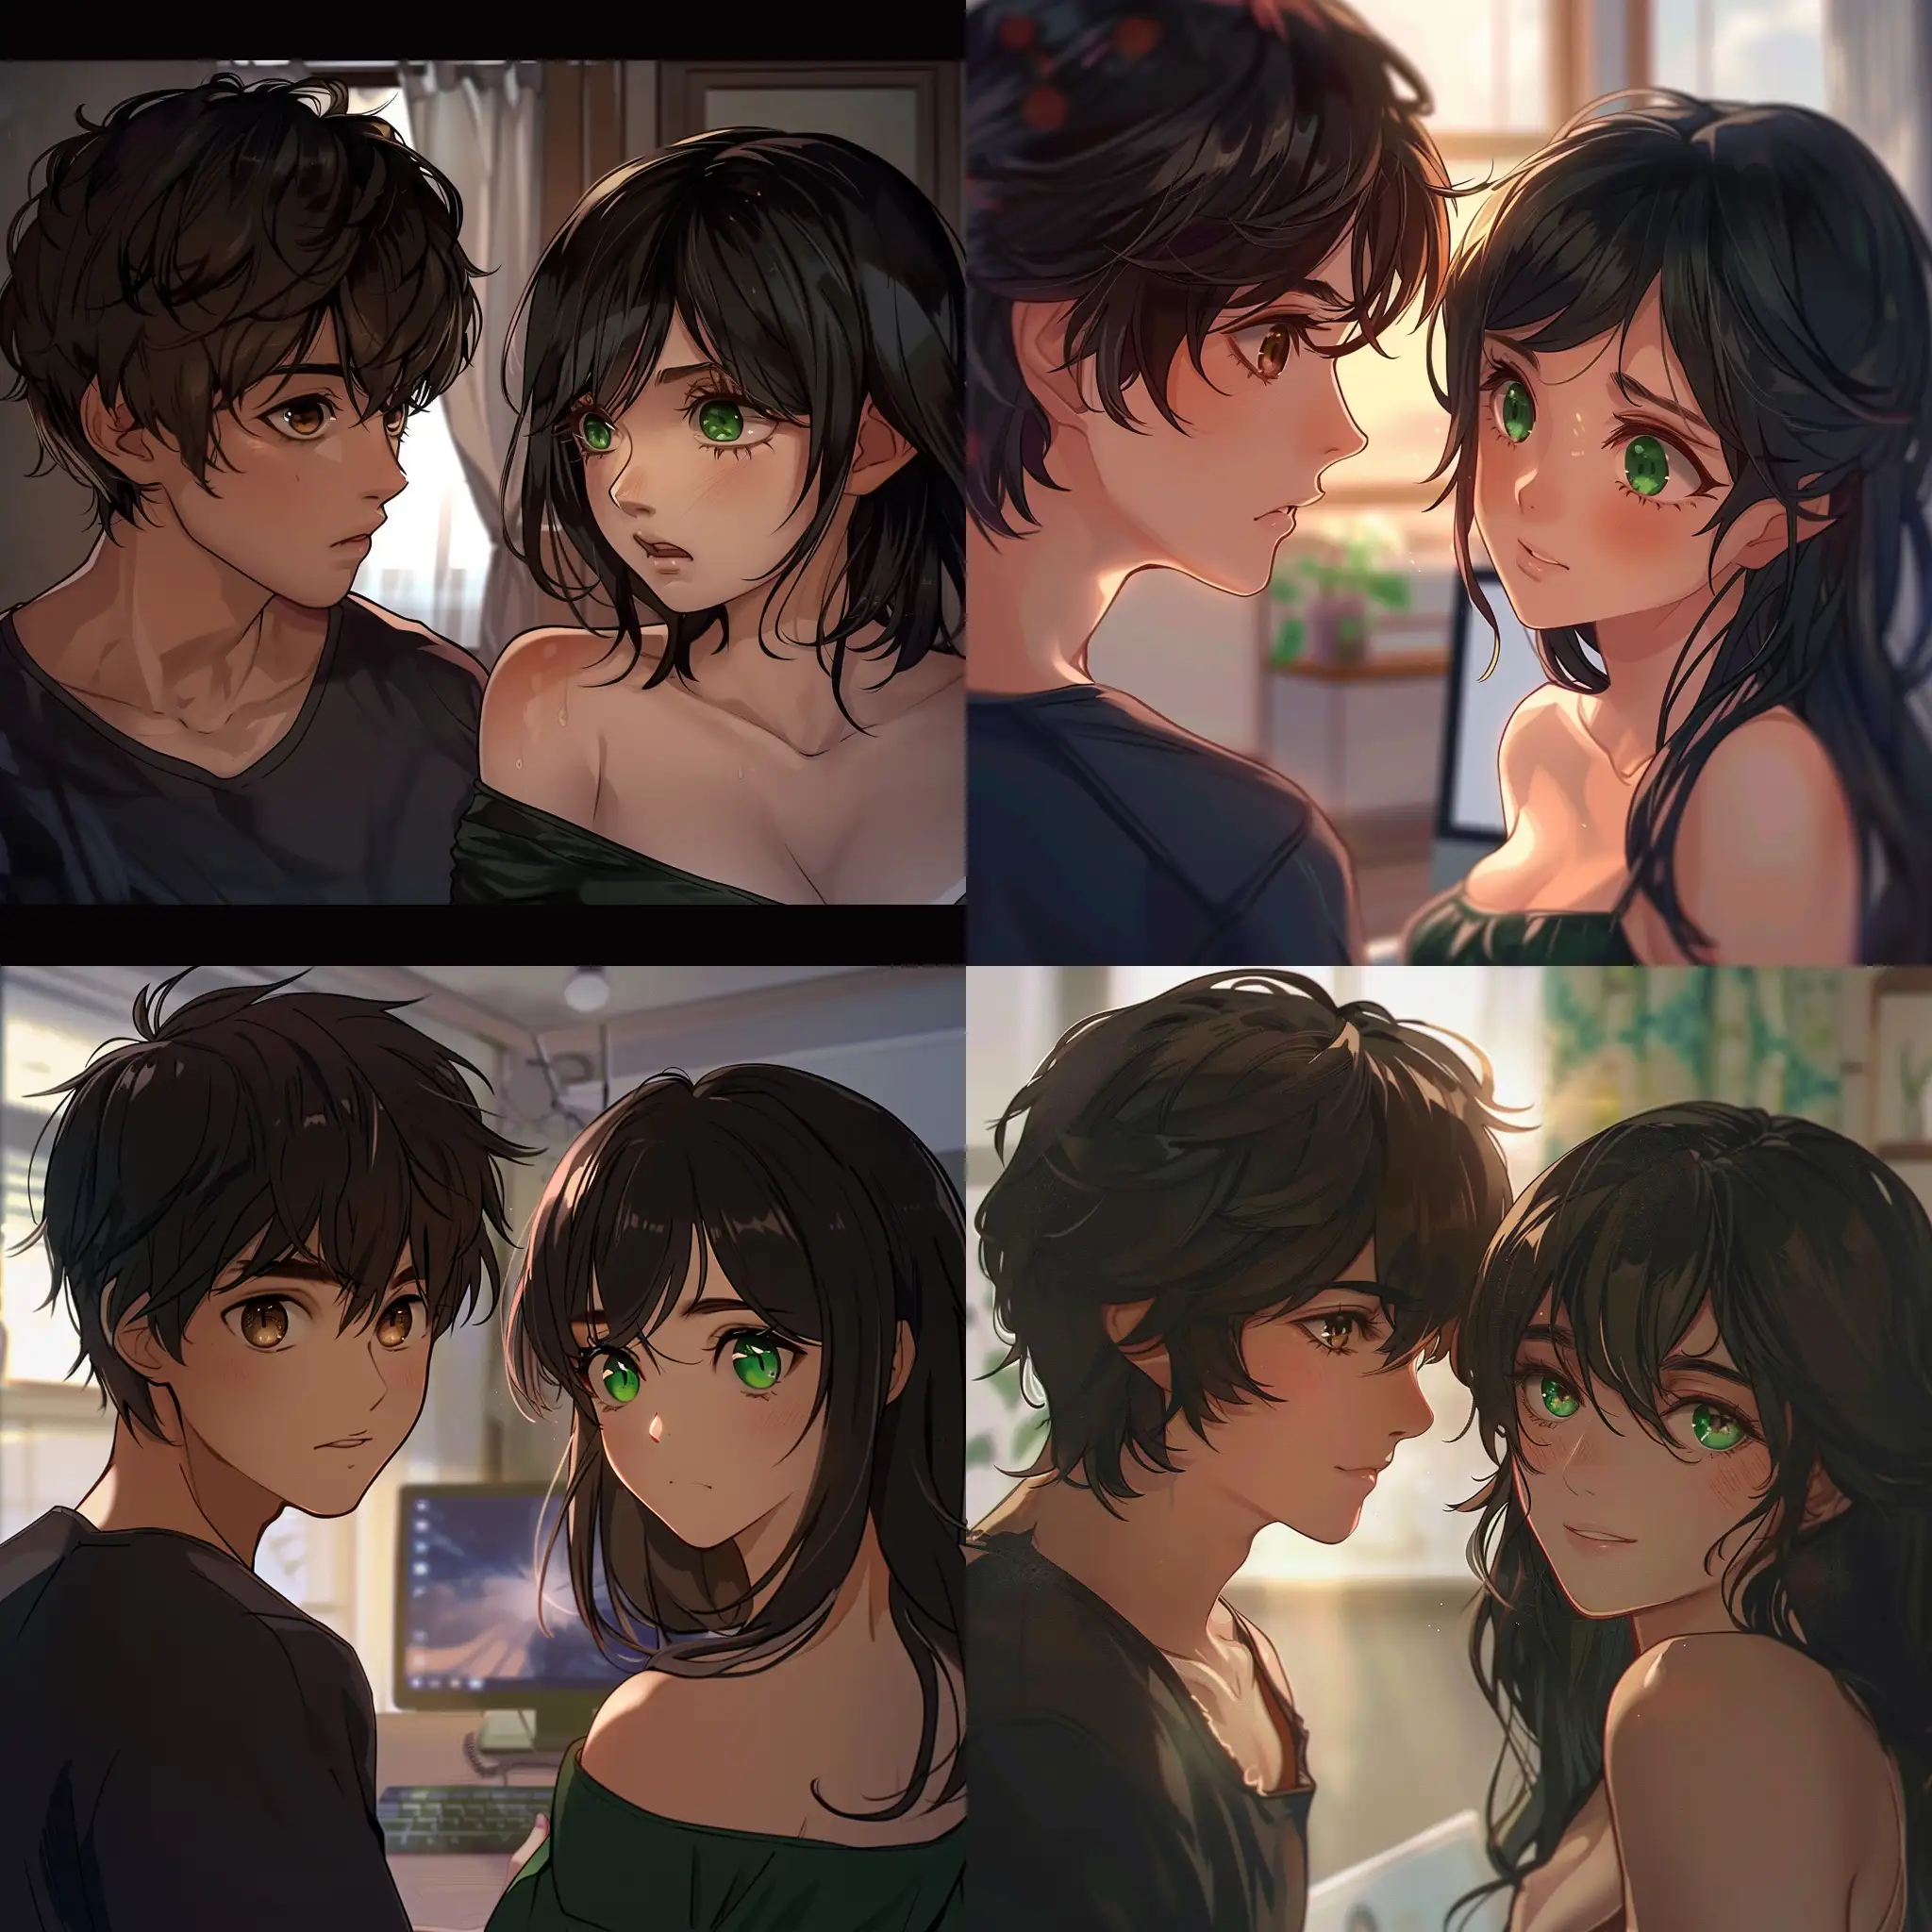 a dark-haired guy with brown eyes and a beautiful dark-haired girl with green eyes gently communicate via video via computers, flirt, there is a long distance between them, the background is fabulous, the style of anime realism, the girl slightly bares her shoulder, the guy looks at her with amazement